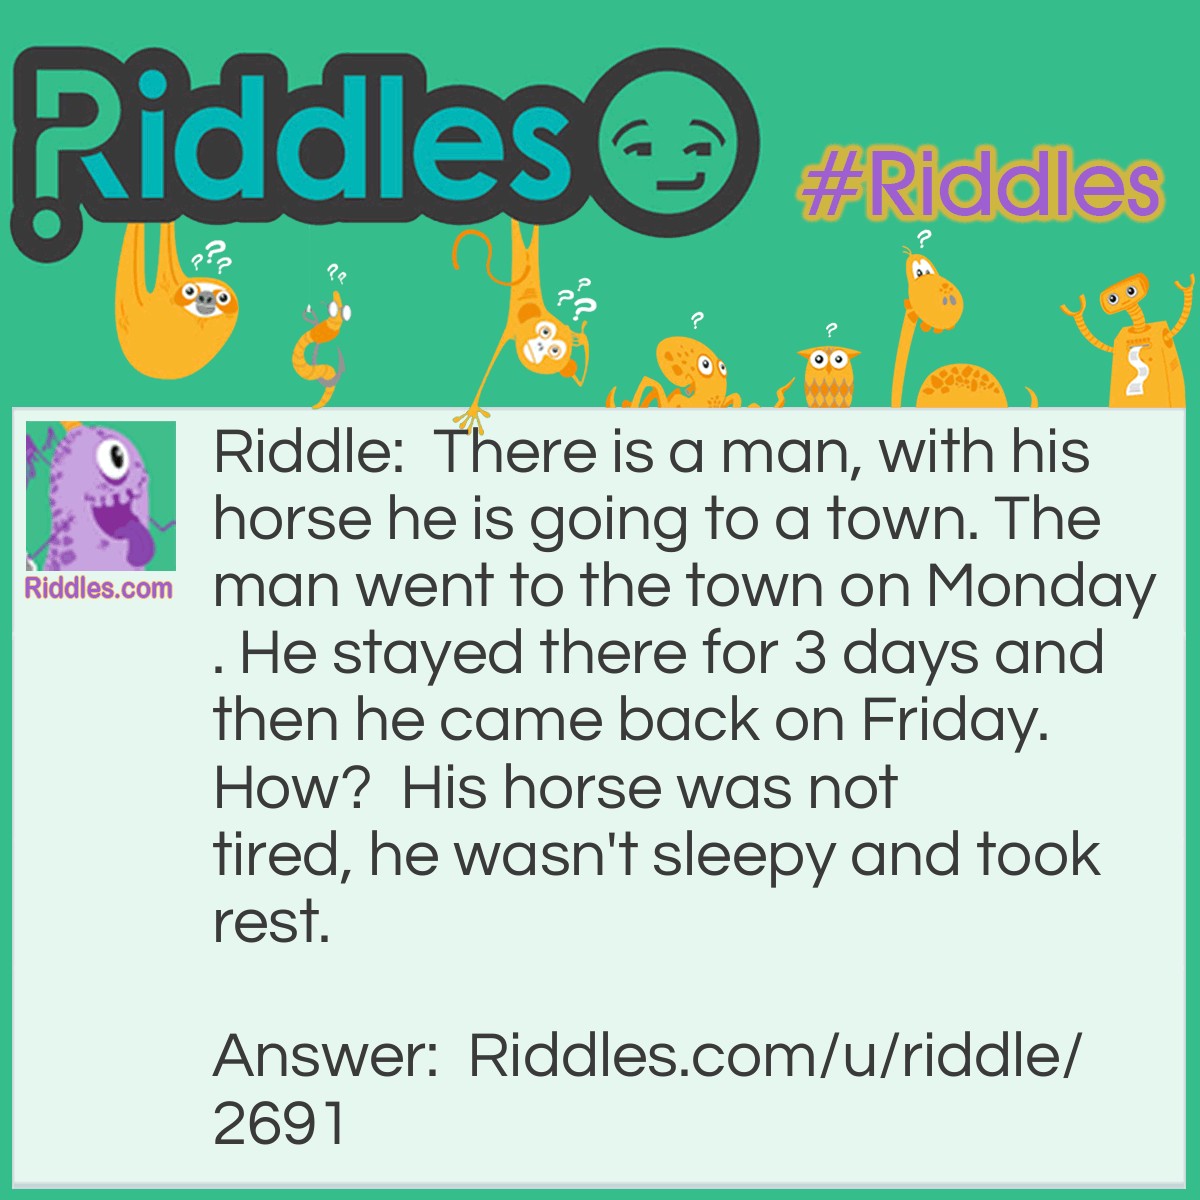 Riddle: There is a man, with his horse he is going to a town. The man went to the town on Monday. He stayed there for 3 days and then he came back on Friday. How?  His horse was not tired, he wasn't sleepy and took rest. Answer: The horse's name was Friday.